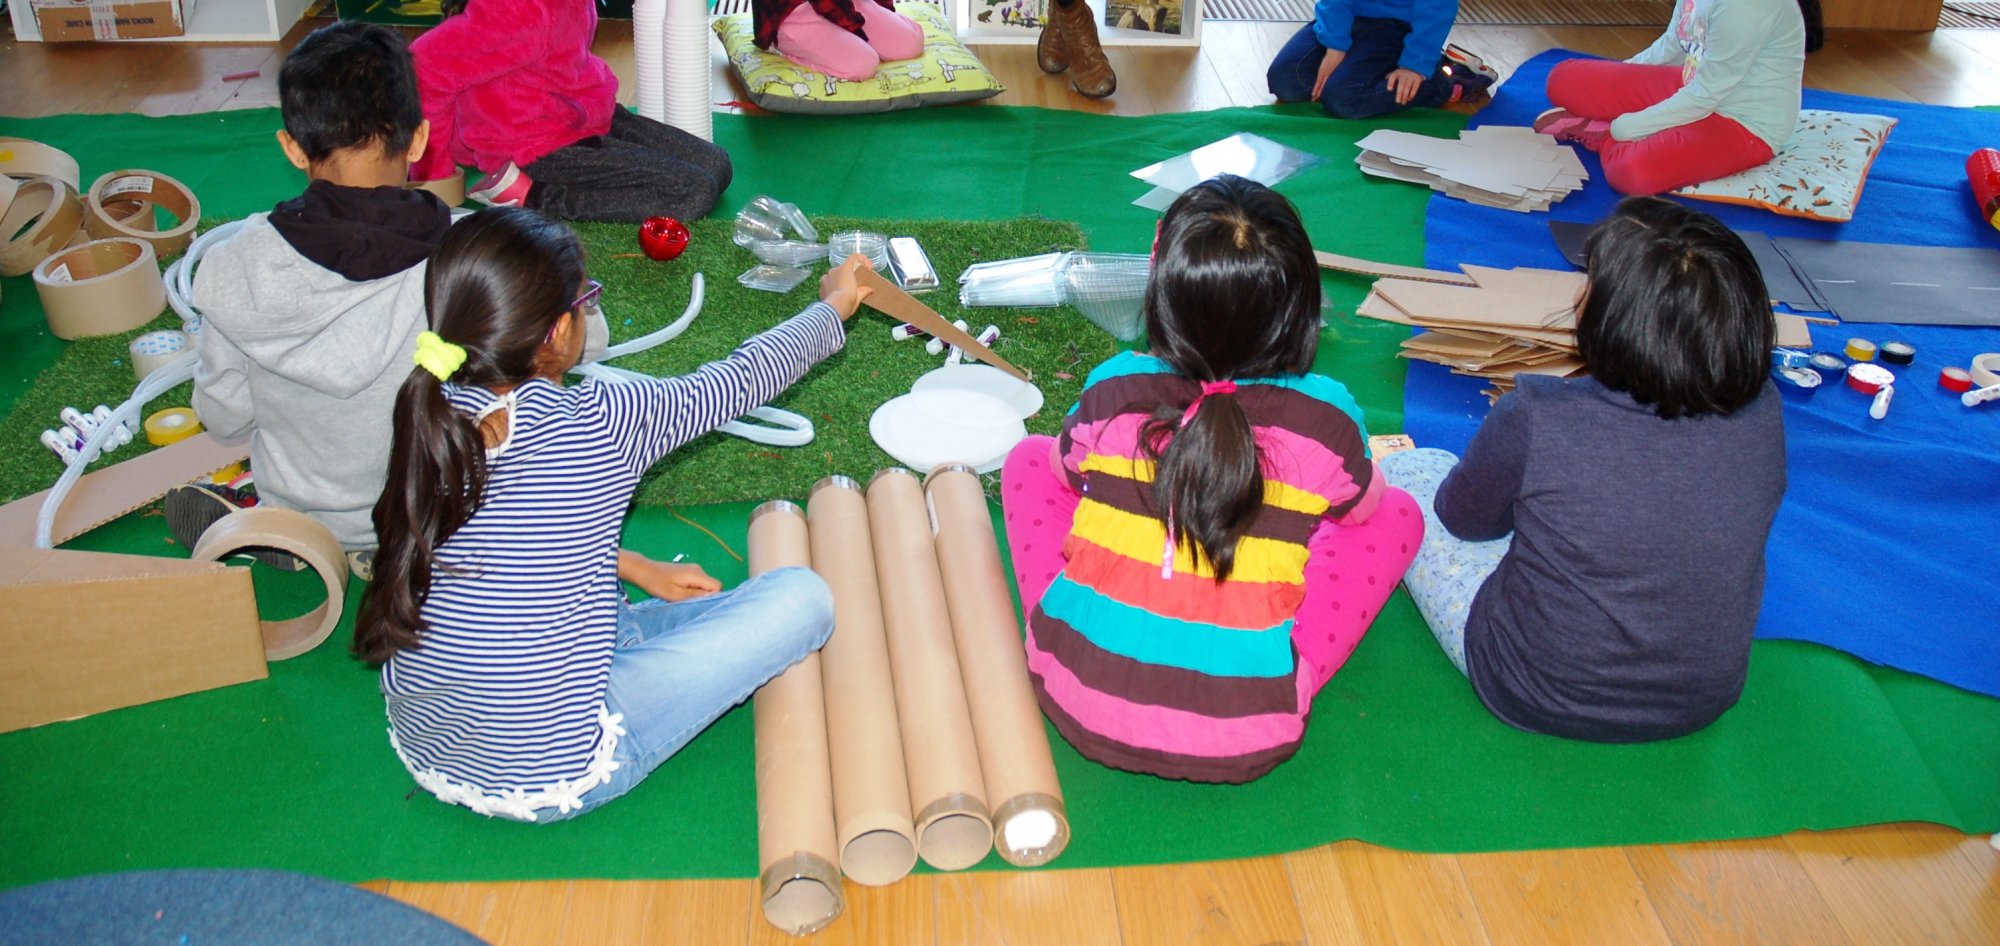 Image of children in Project Room